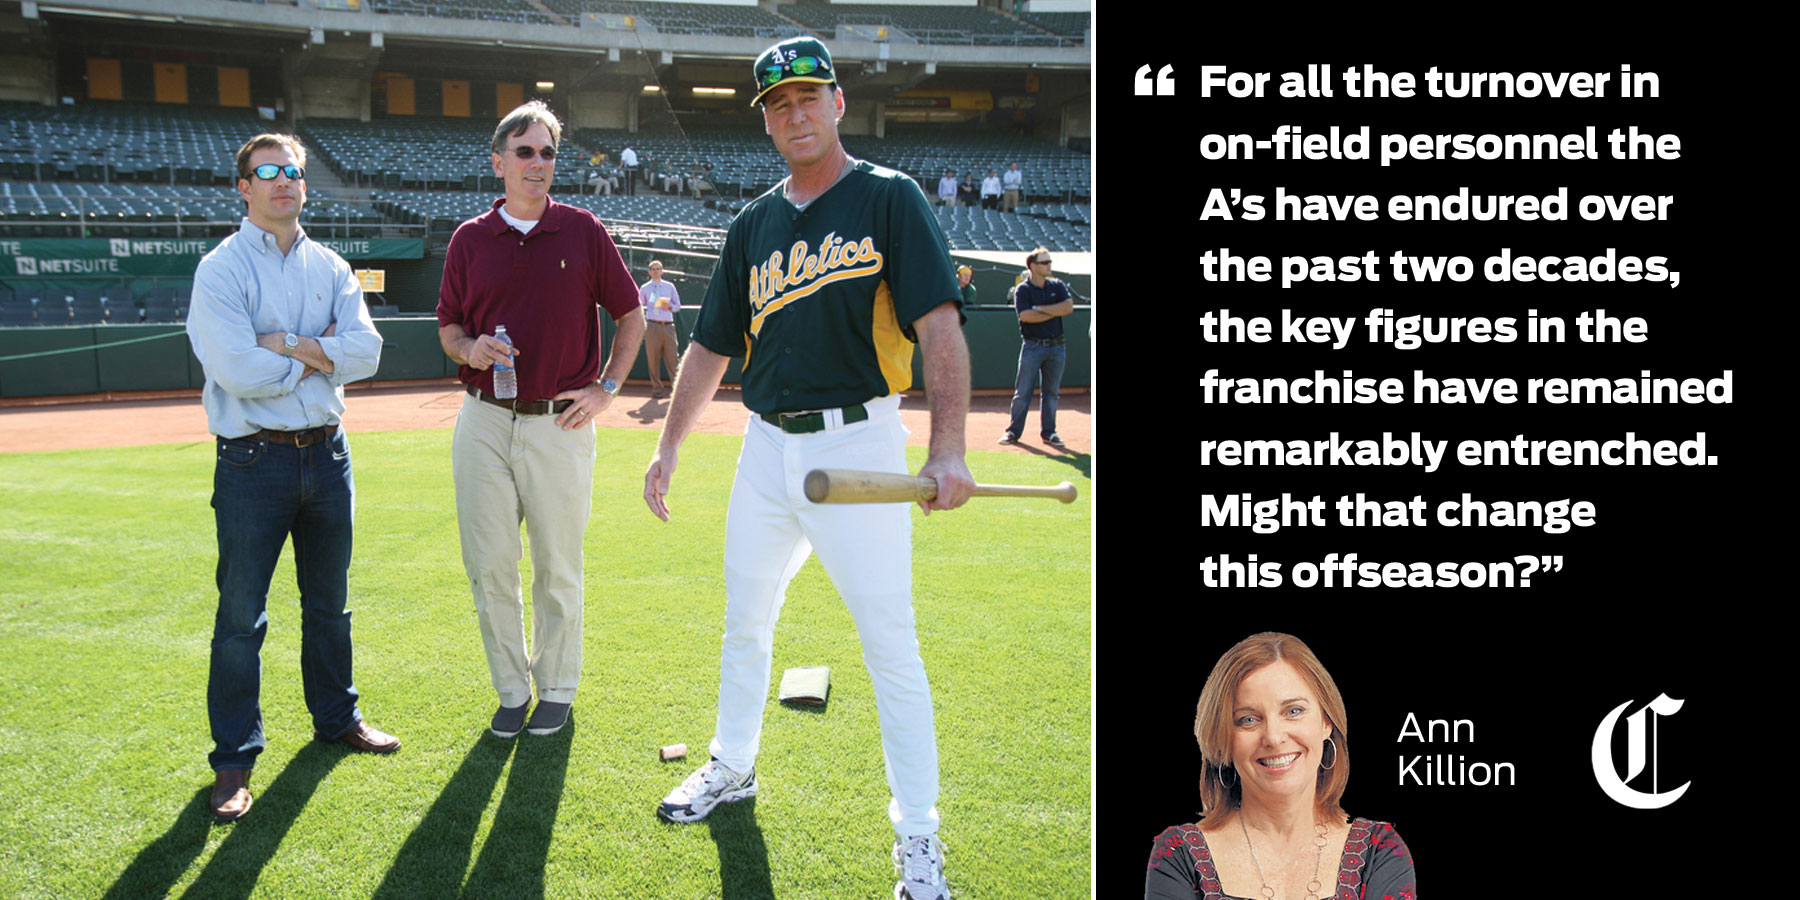 Will John Fisher, Billy Beane and Bob Melvin remain together with A's?